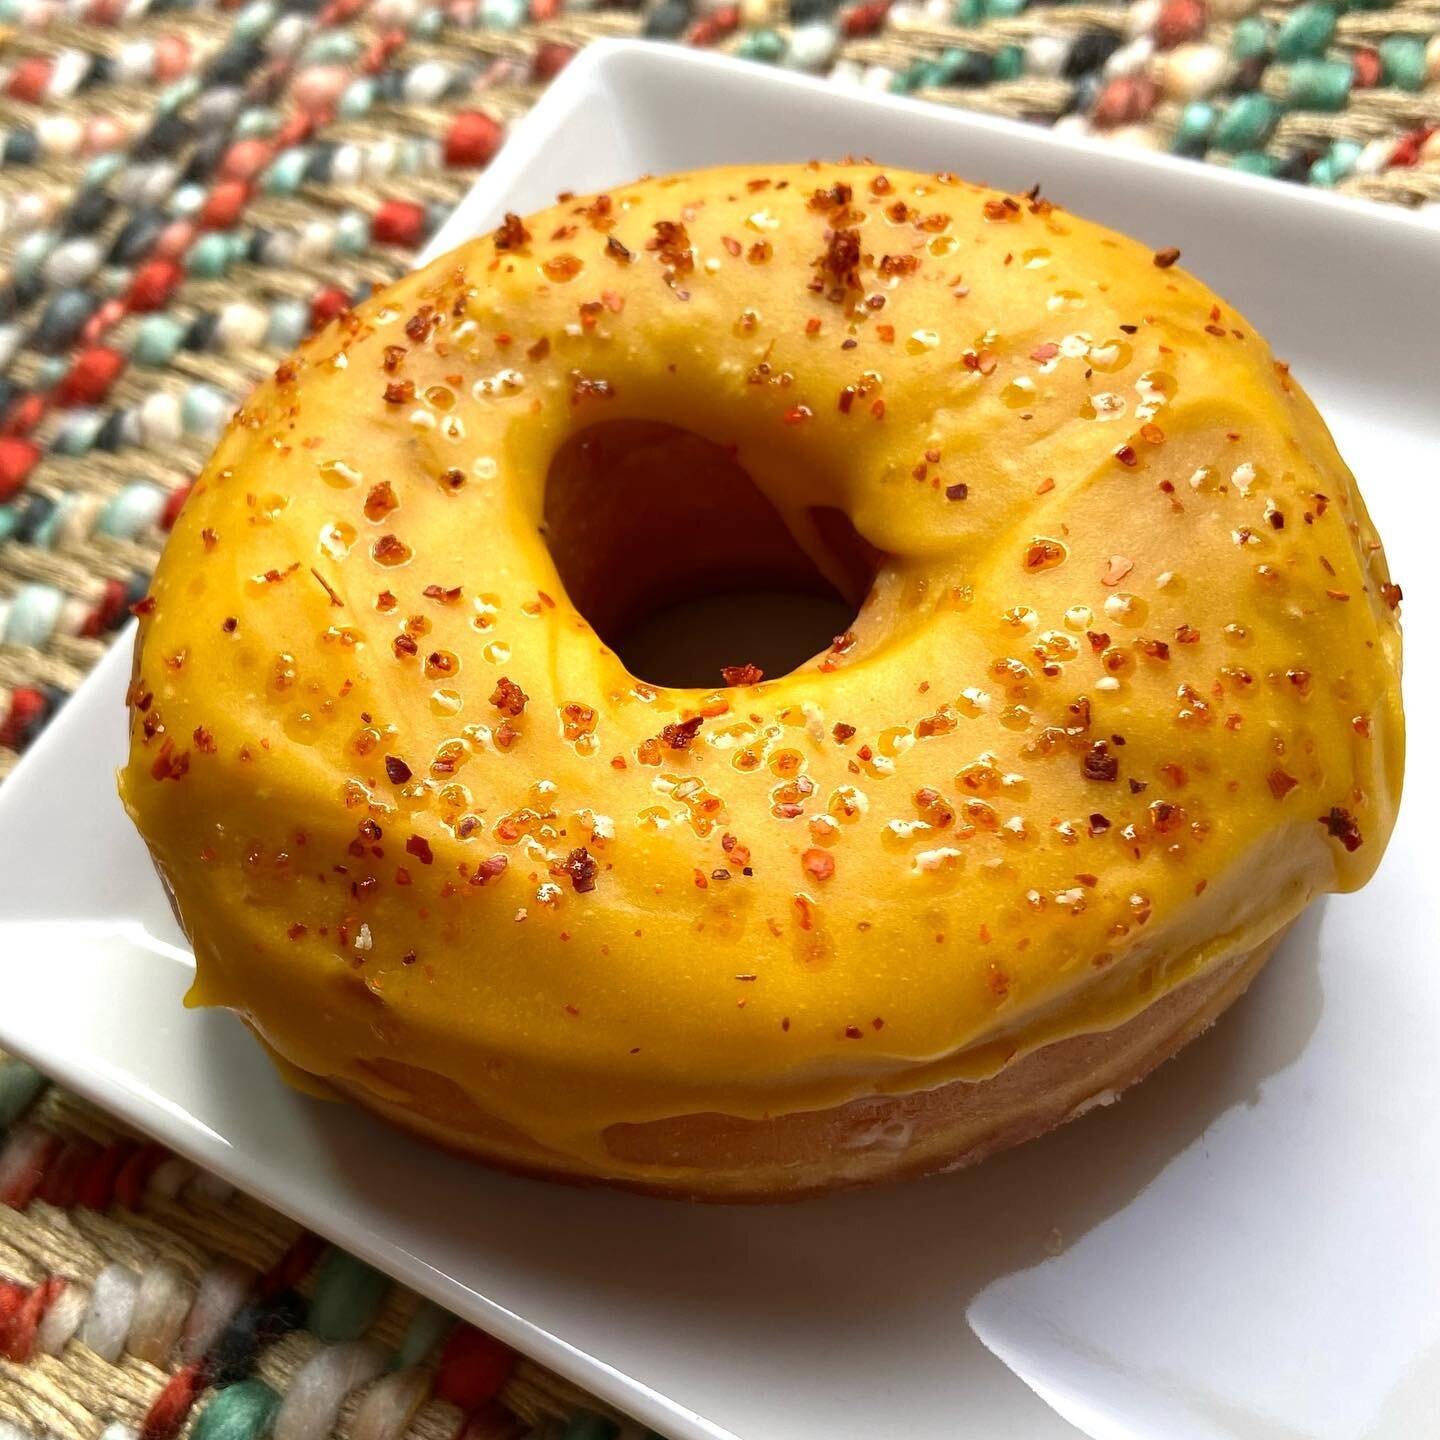 Announcement coming in hot today!

Introducing our Chili 🌶 Mango 🥭 donut!

Perfectly sweet with a hint of spice on our raised brioche donut. 

This special donut starts today!

#chilimango #donuts #sweetwithalittleheat